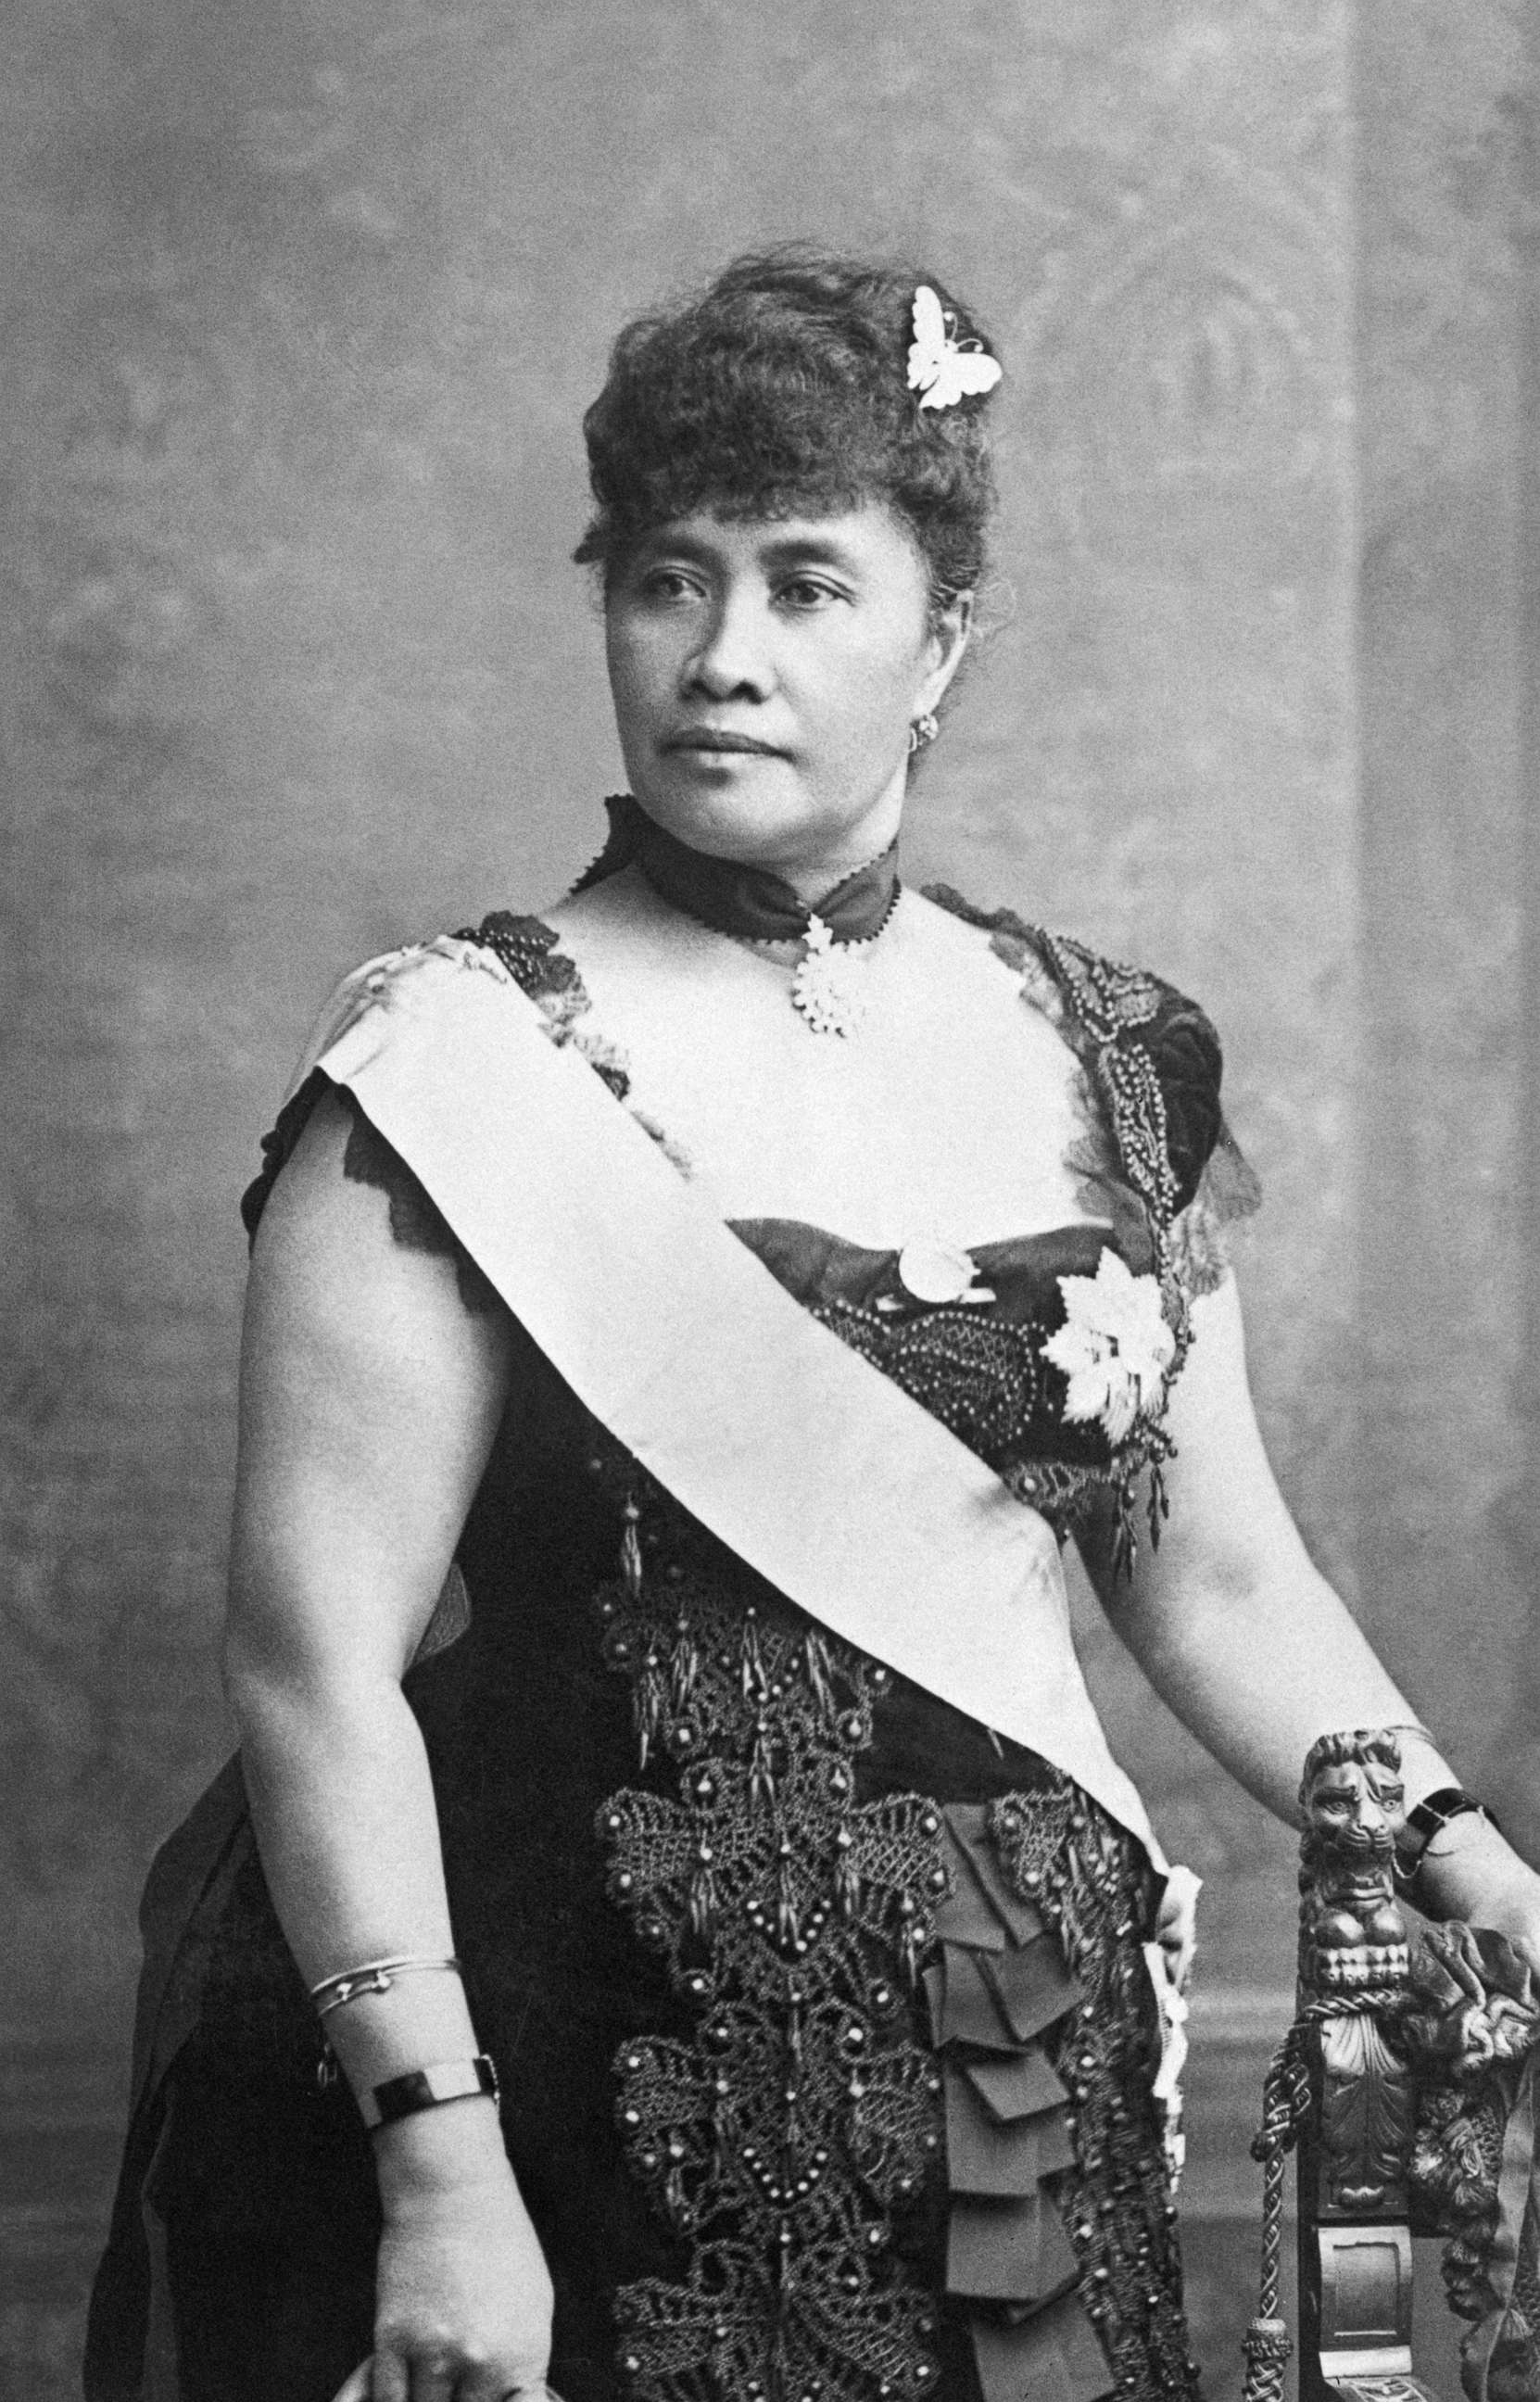 PHOTO: Queen Liliuokalani of Hawaii poses for a portrait, ca. 1887.